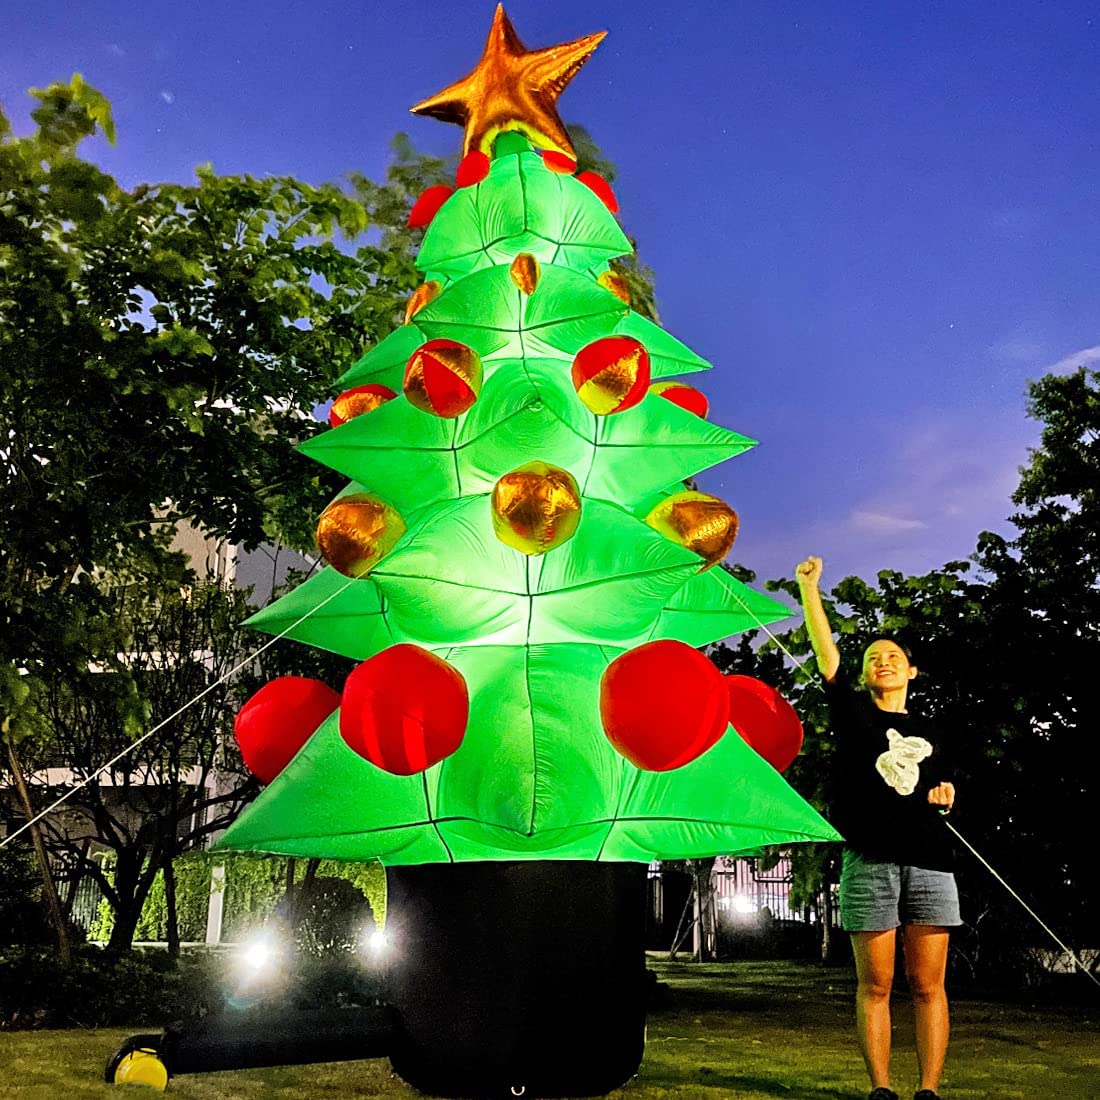 13ft Inflatable Christmas Tree with LED Lights: Dazzling Holiday Decor